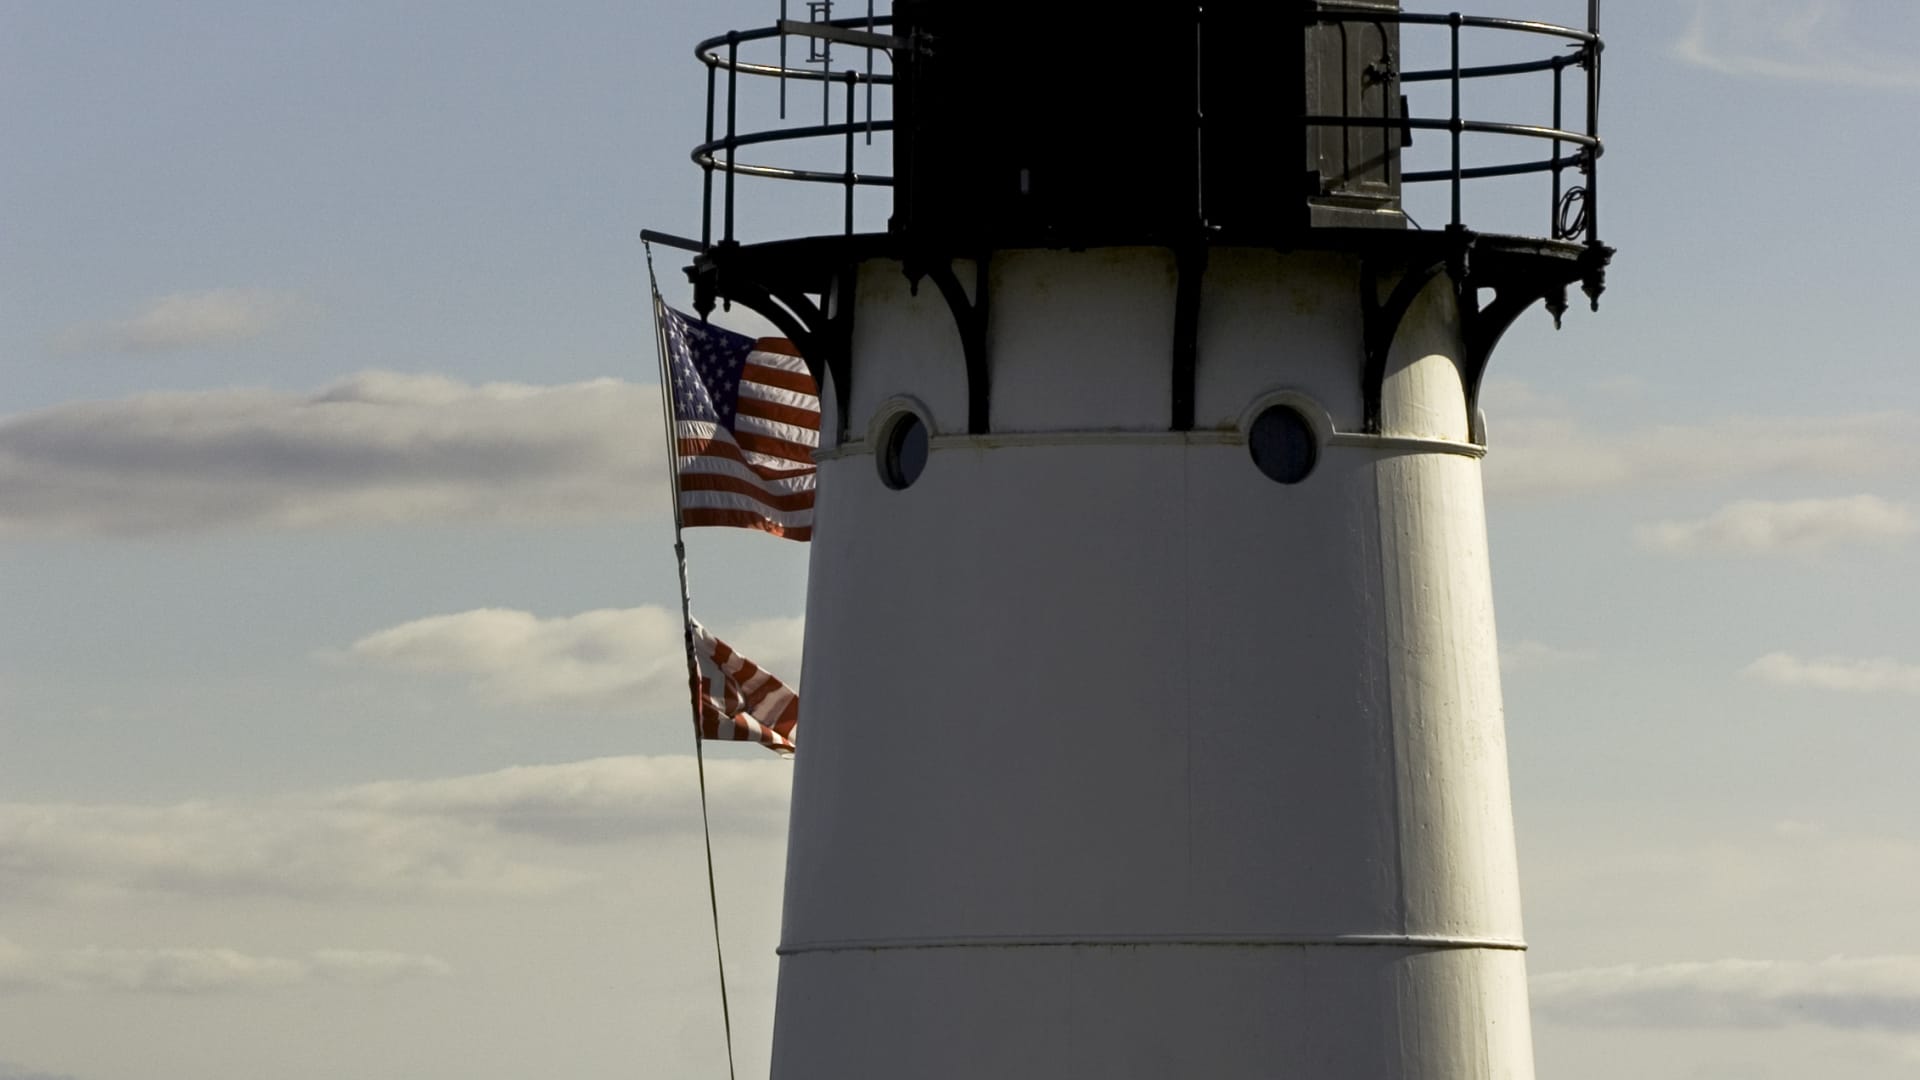 Warwick Neck Light is located on Narragansett Bay in Rhode Island and is one of the lighthouses being given away for free.